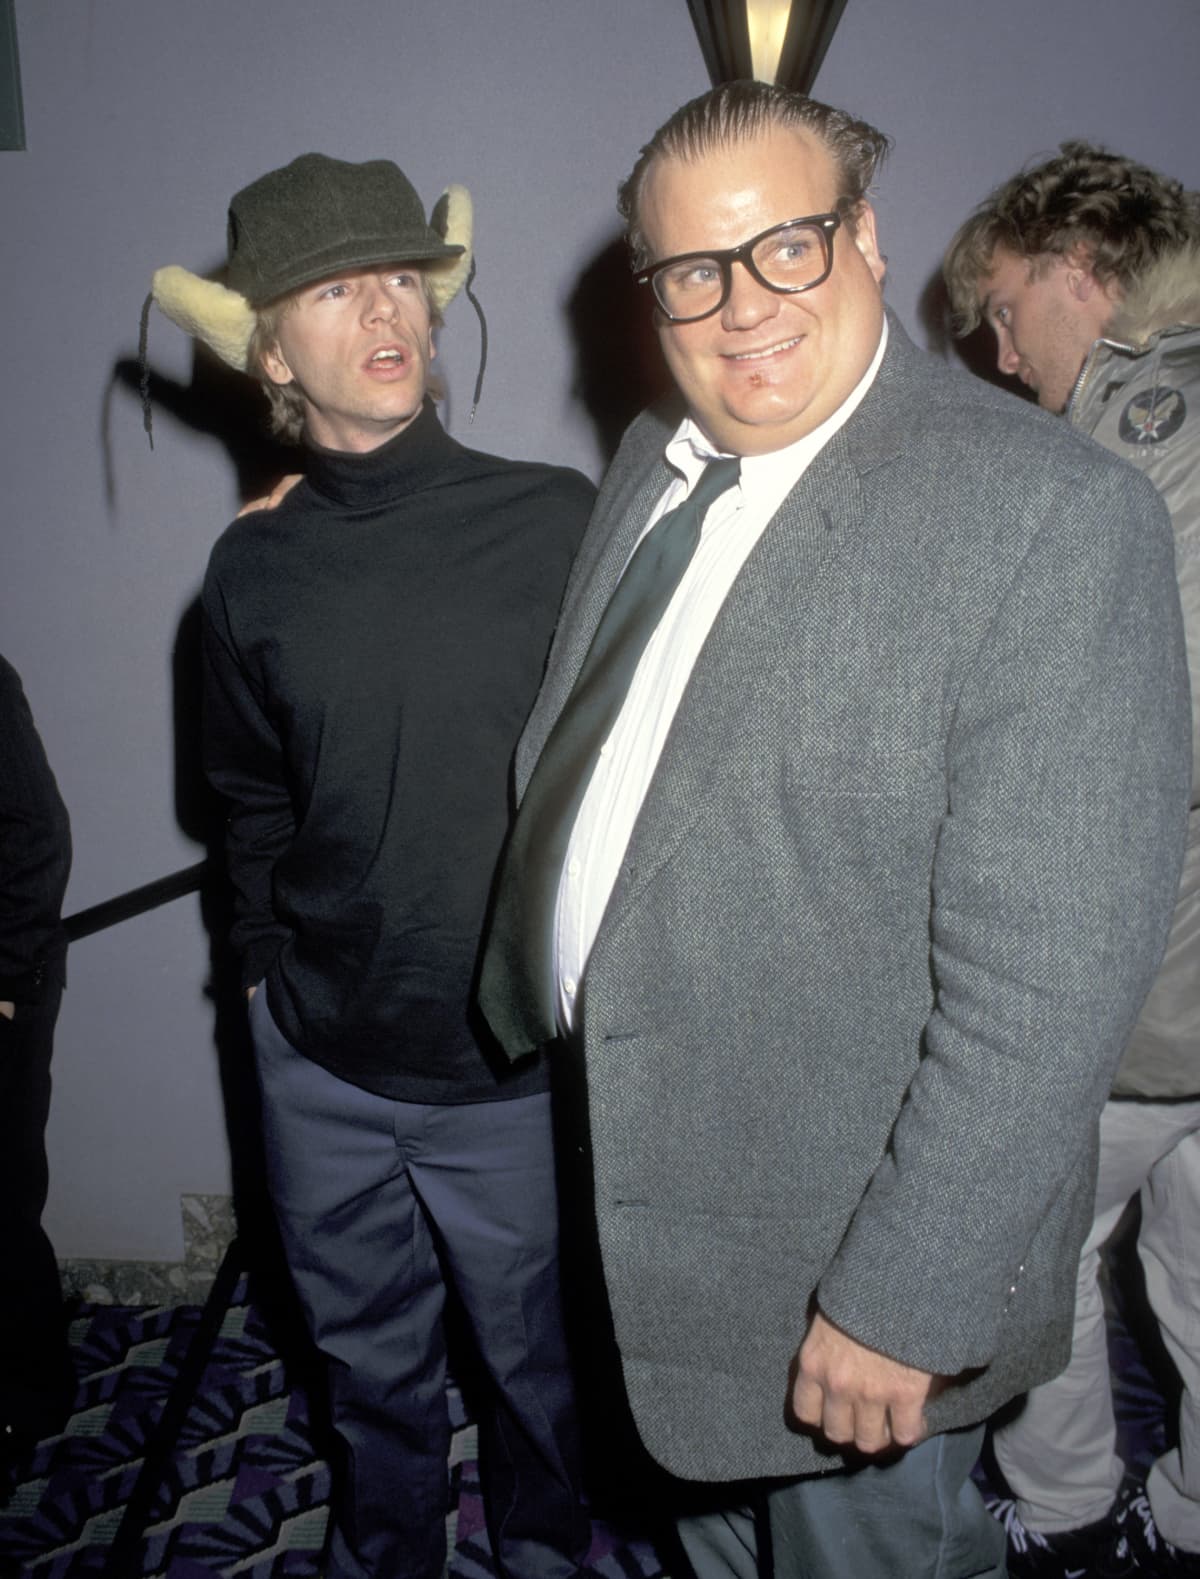 David Spade and Chris Farley (Photo by Ron Galella/Ron Galella Collection via Getty Images)